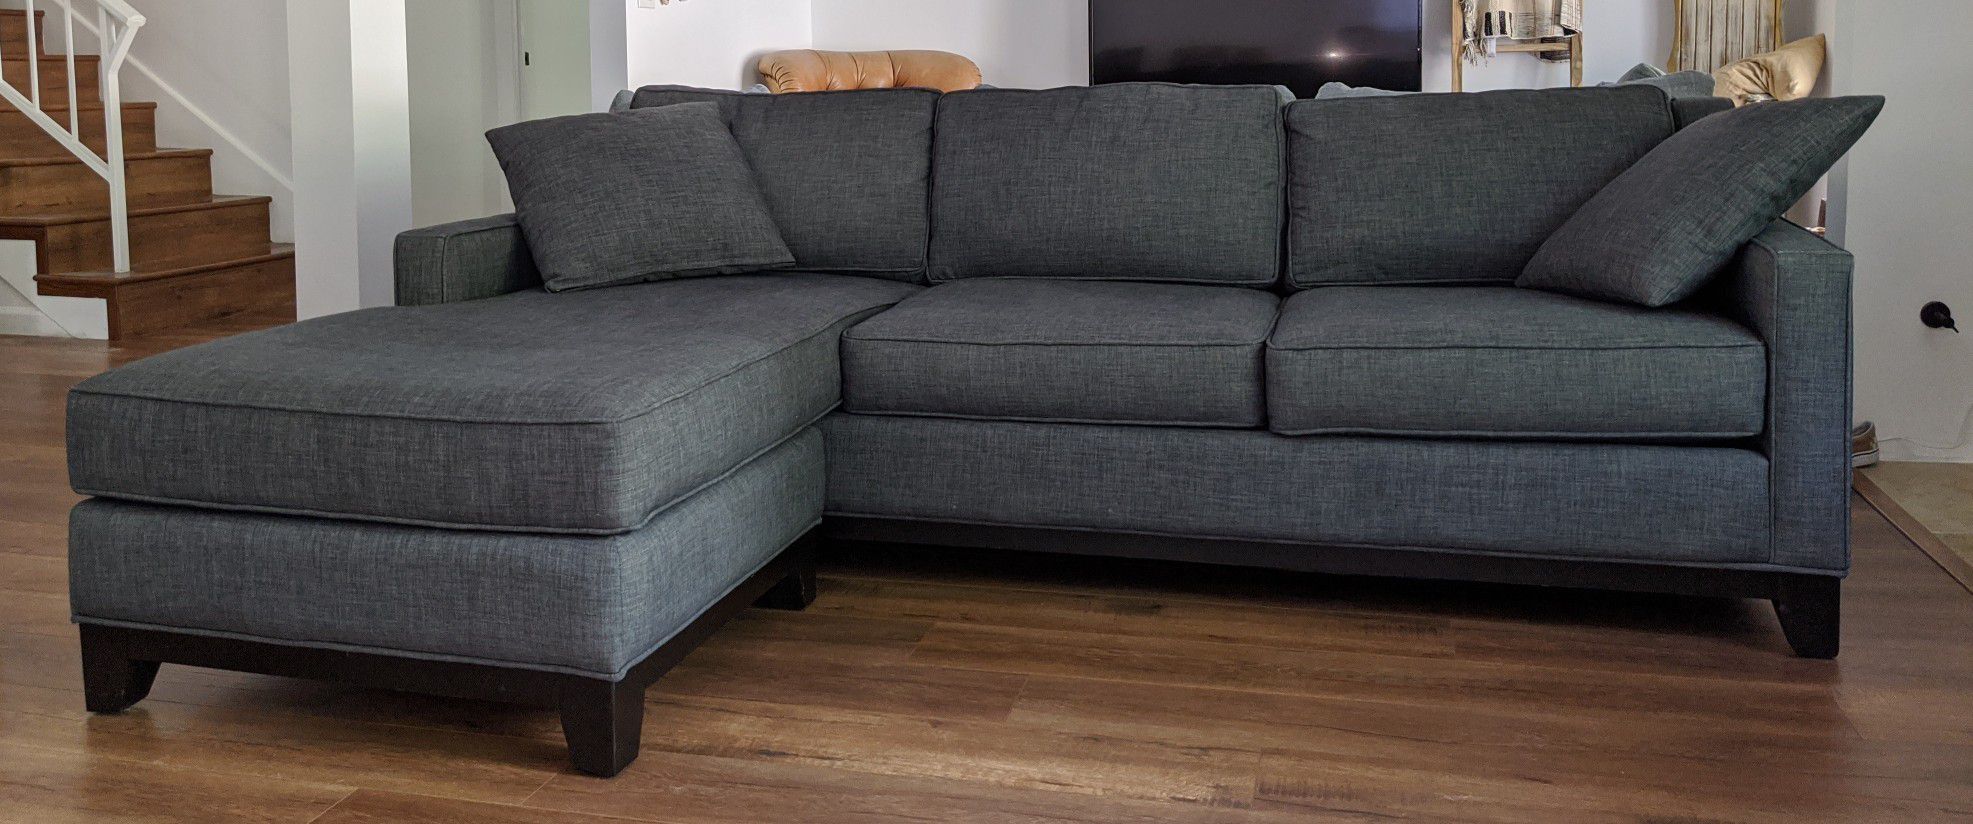 Fabric Reversible Chaise Sectional Sofa